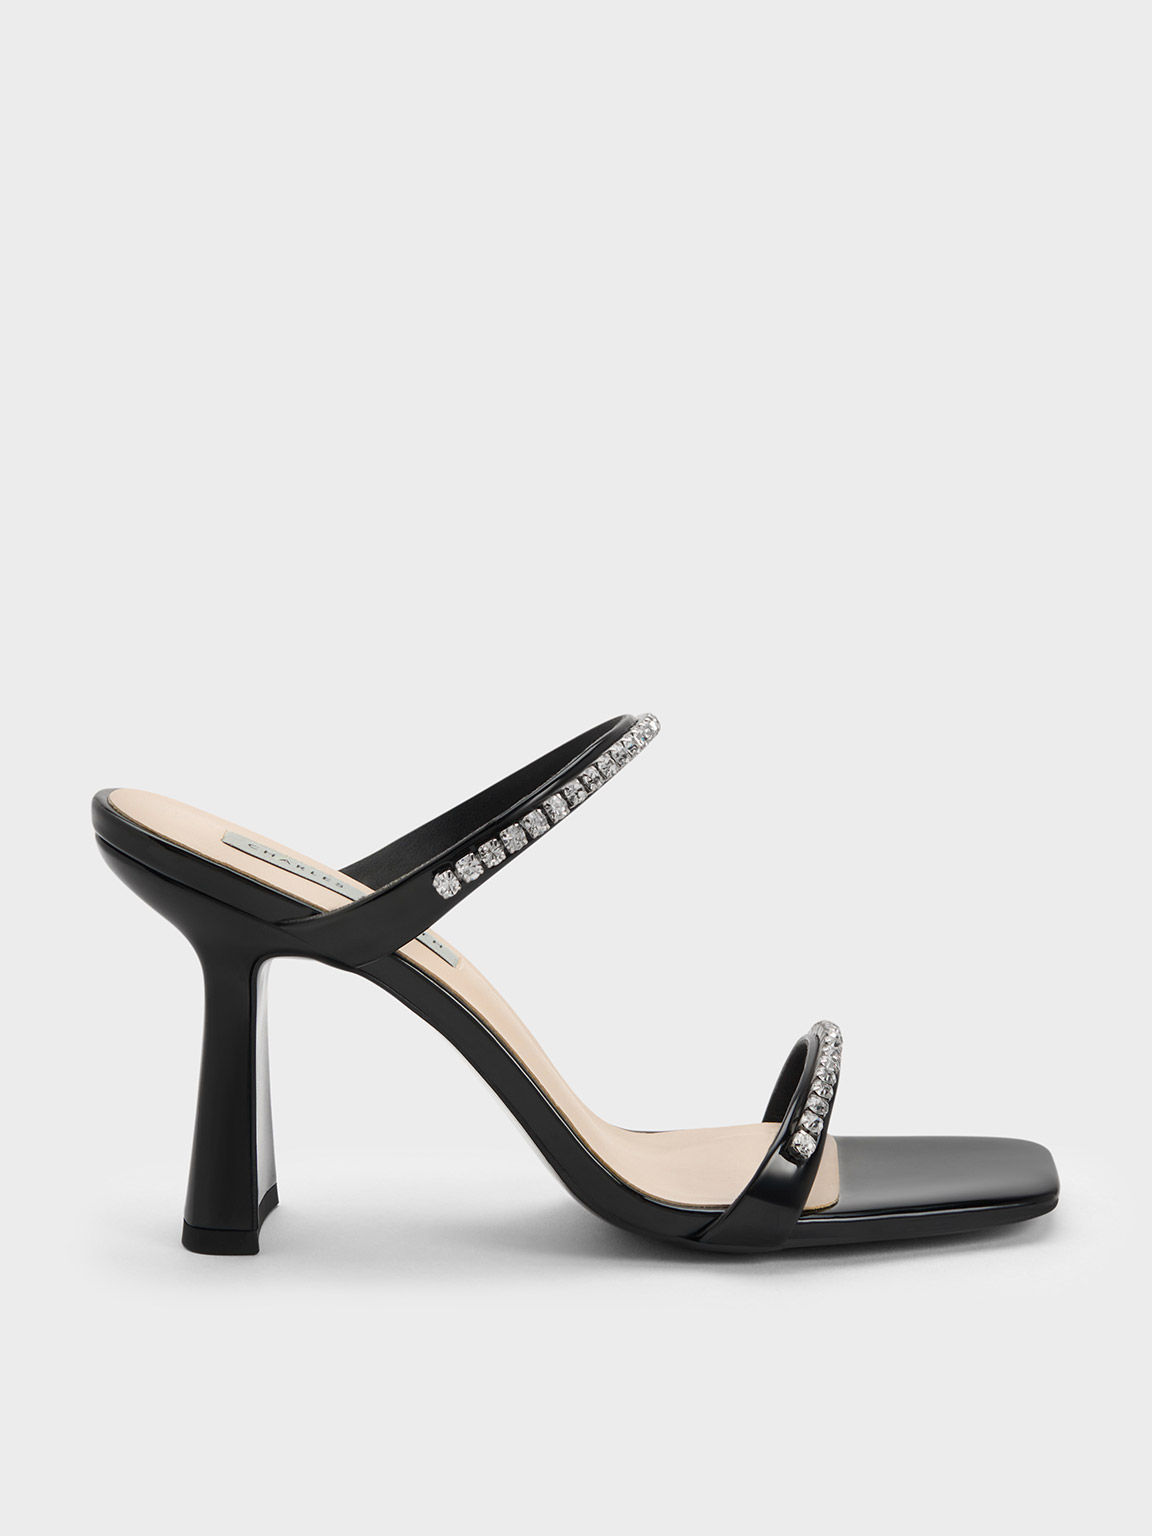 Charles & Keith Patent Gem-encrusted Heeled Sandals In Black Patent